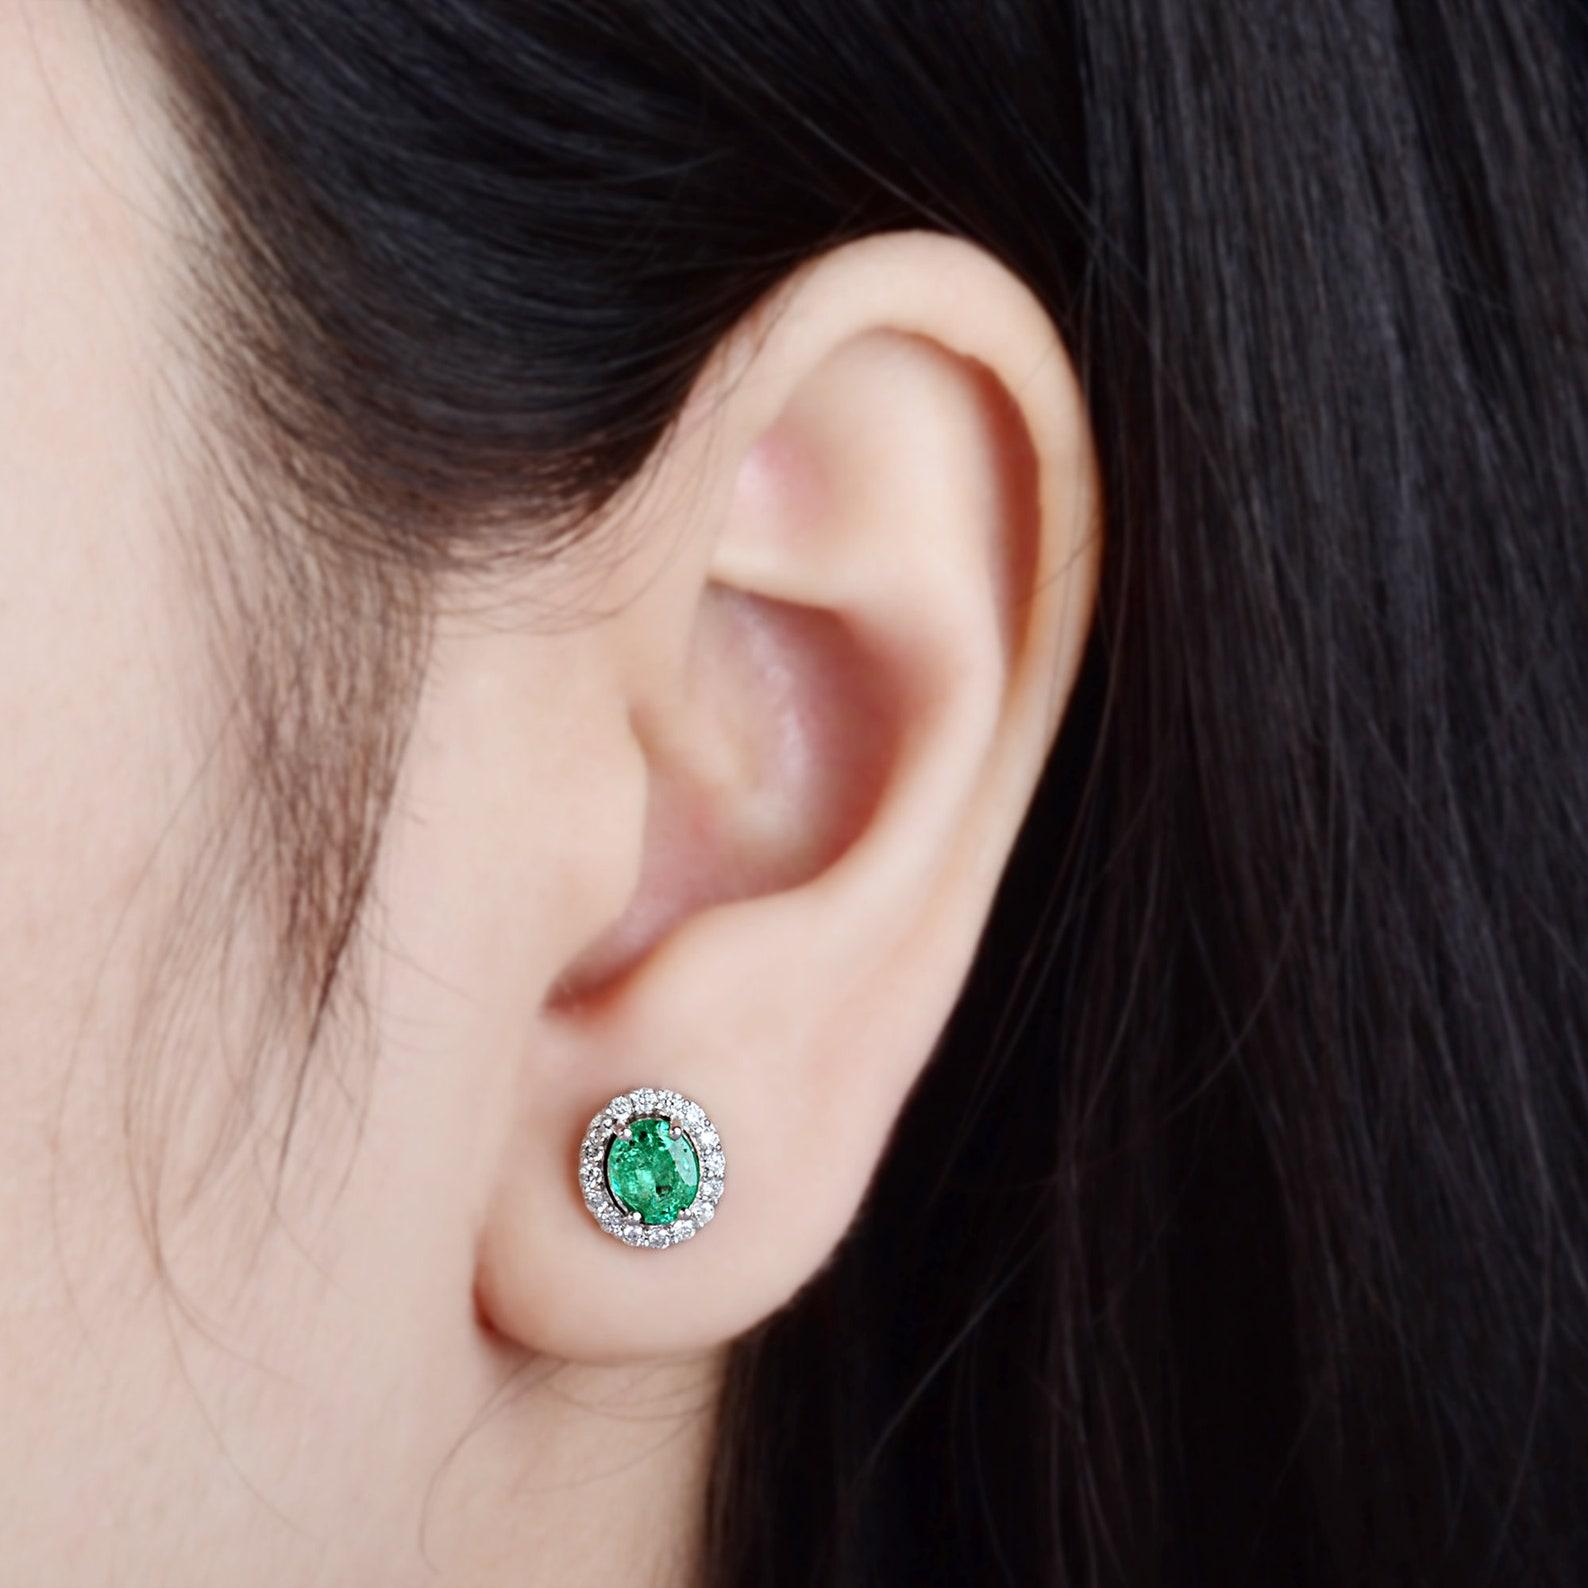 Cast in 10 karat gold, these stud earrings are hand set with 1.1 carats emerald and .27 carats of glimmering diamonds. 

FOLLOW MEGHNA JEWELS storefront to view the latest collection & exclusive pieces. Meghna Jewels is proudly rated as a Top Seller